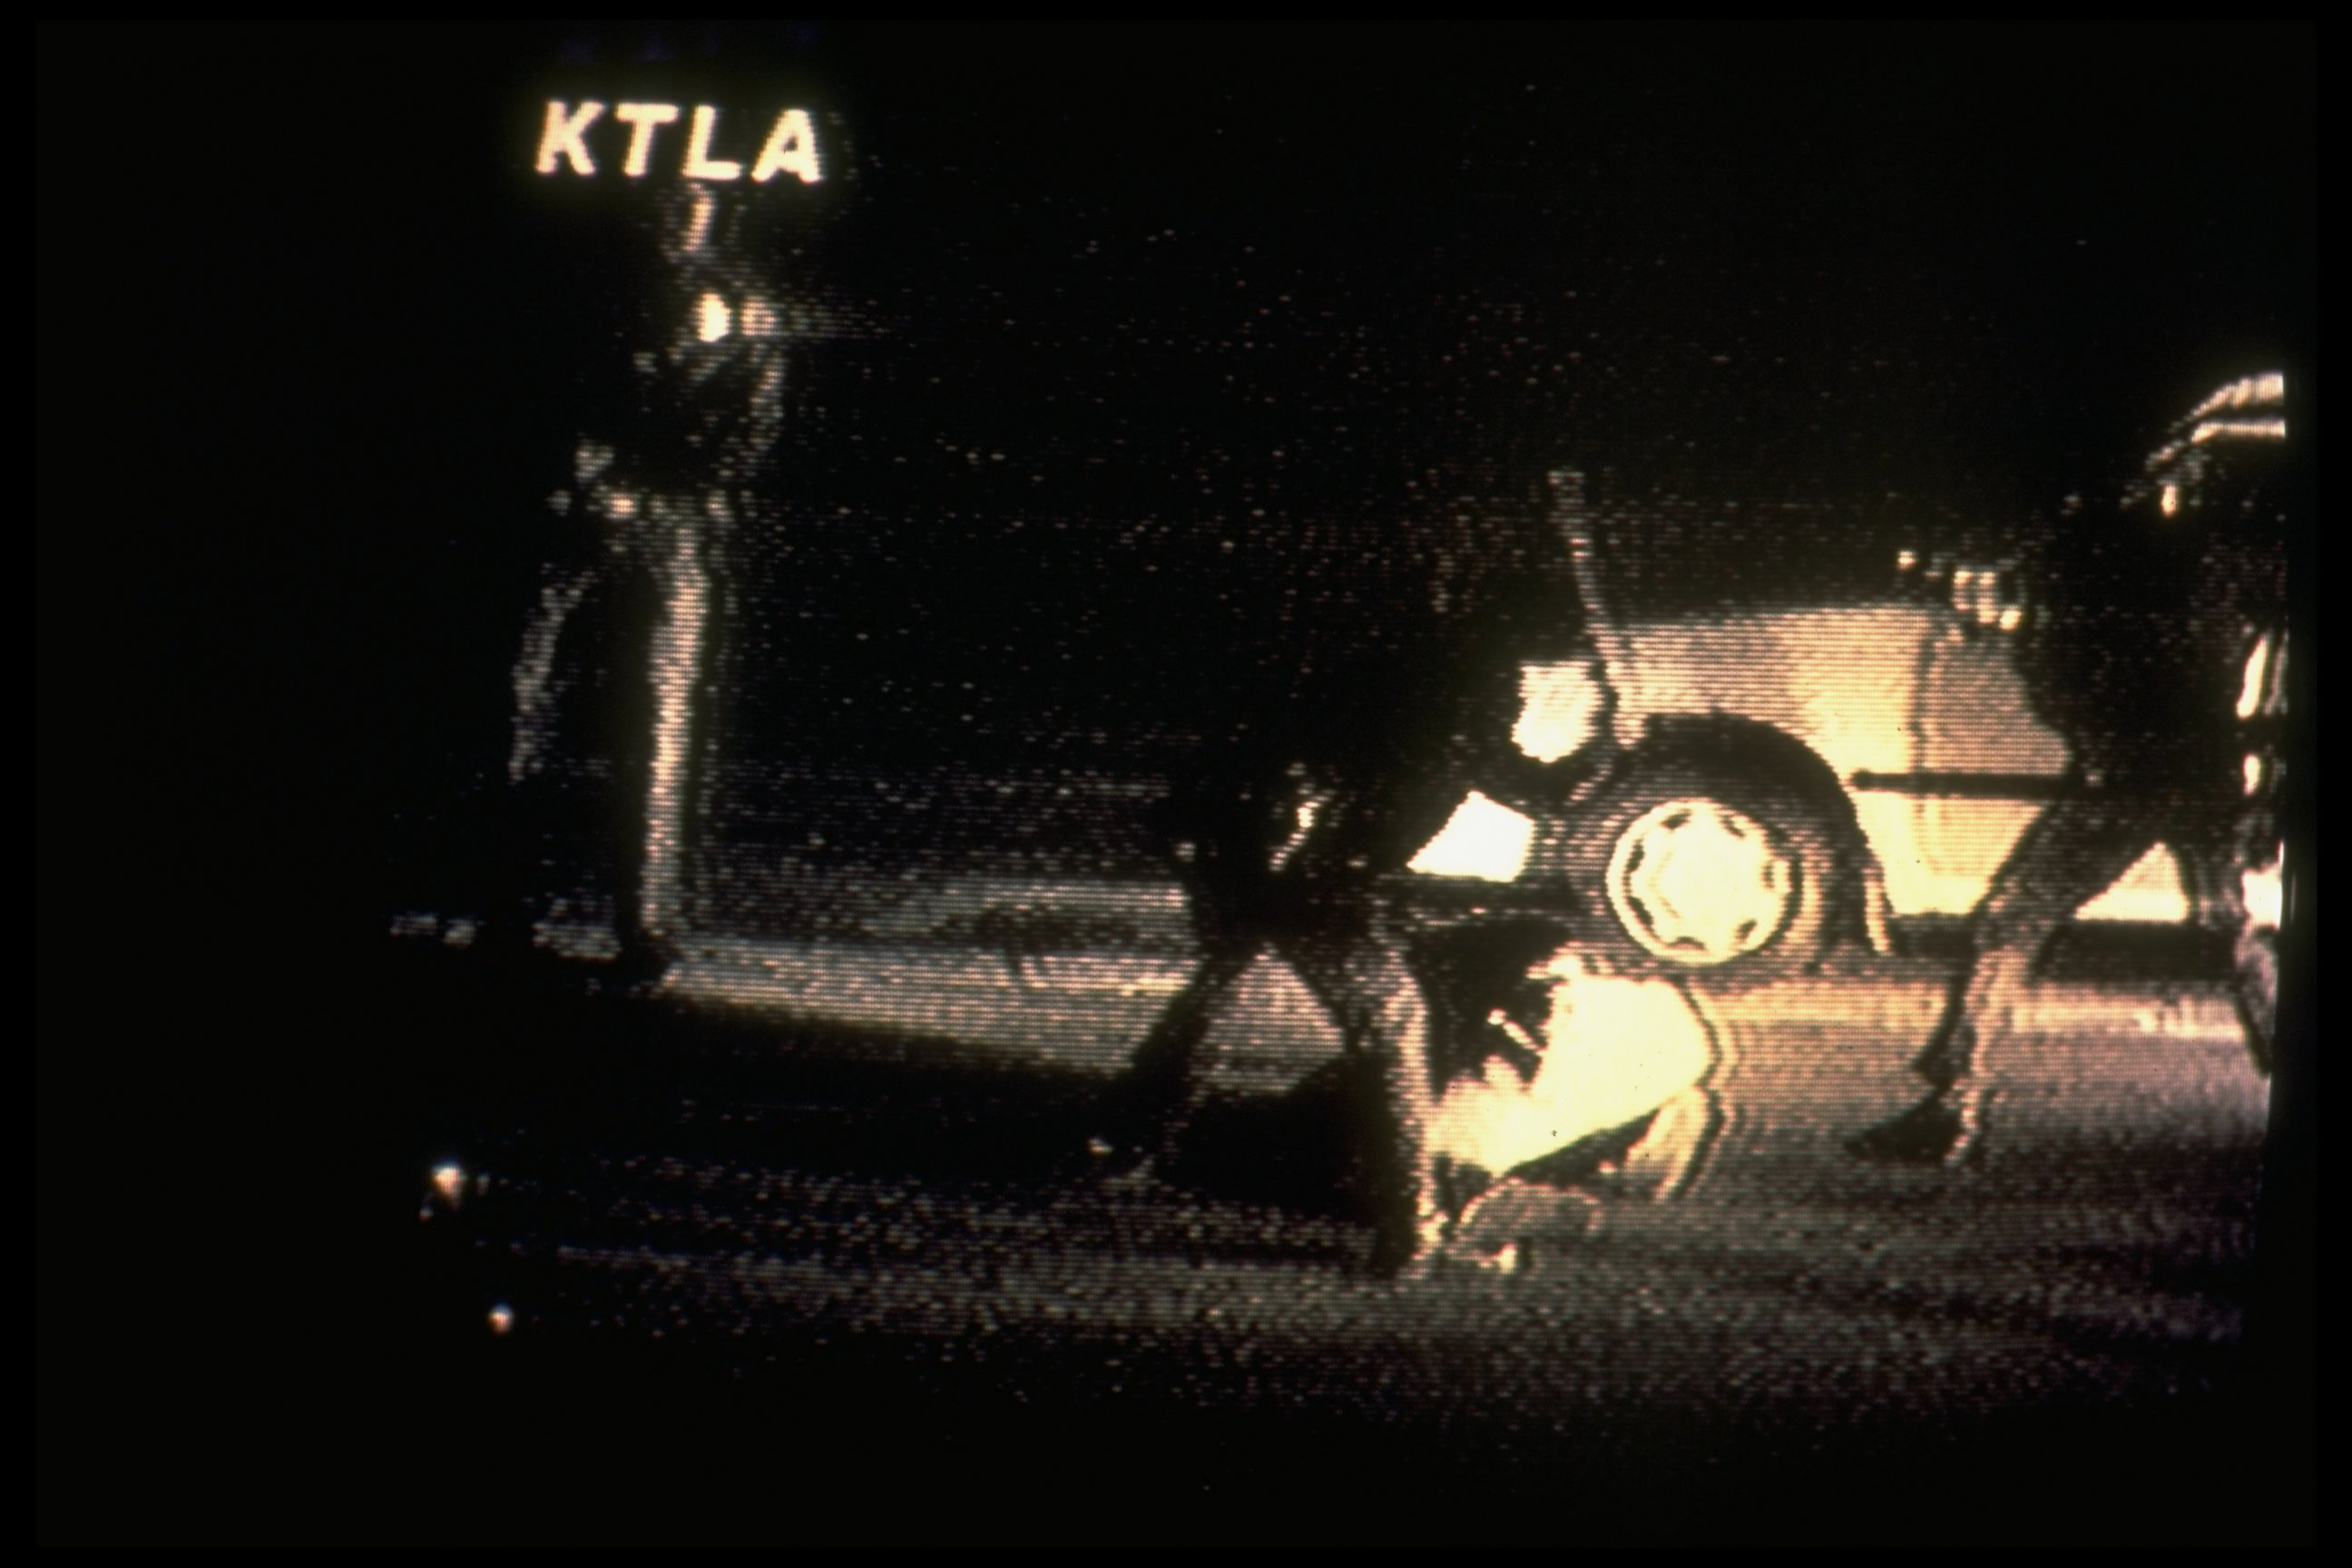 PHOTO: A video image taken by George Holliday shows police beating Rodney King as he lies on ground. 